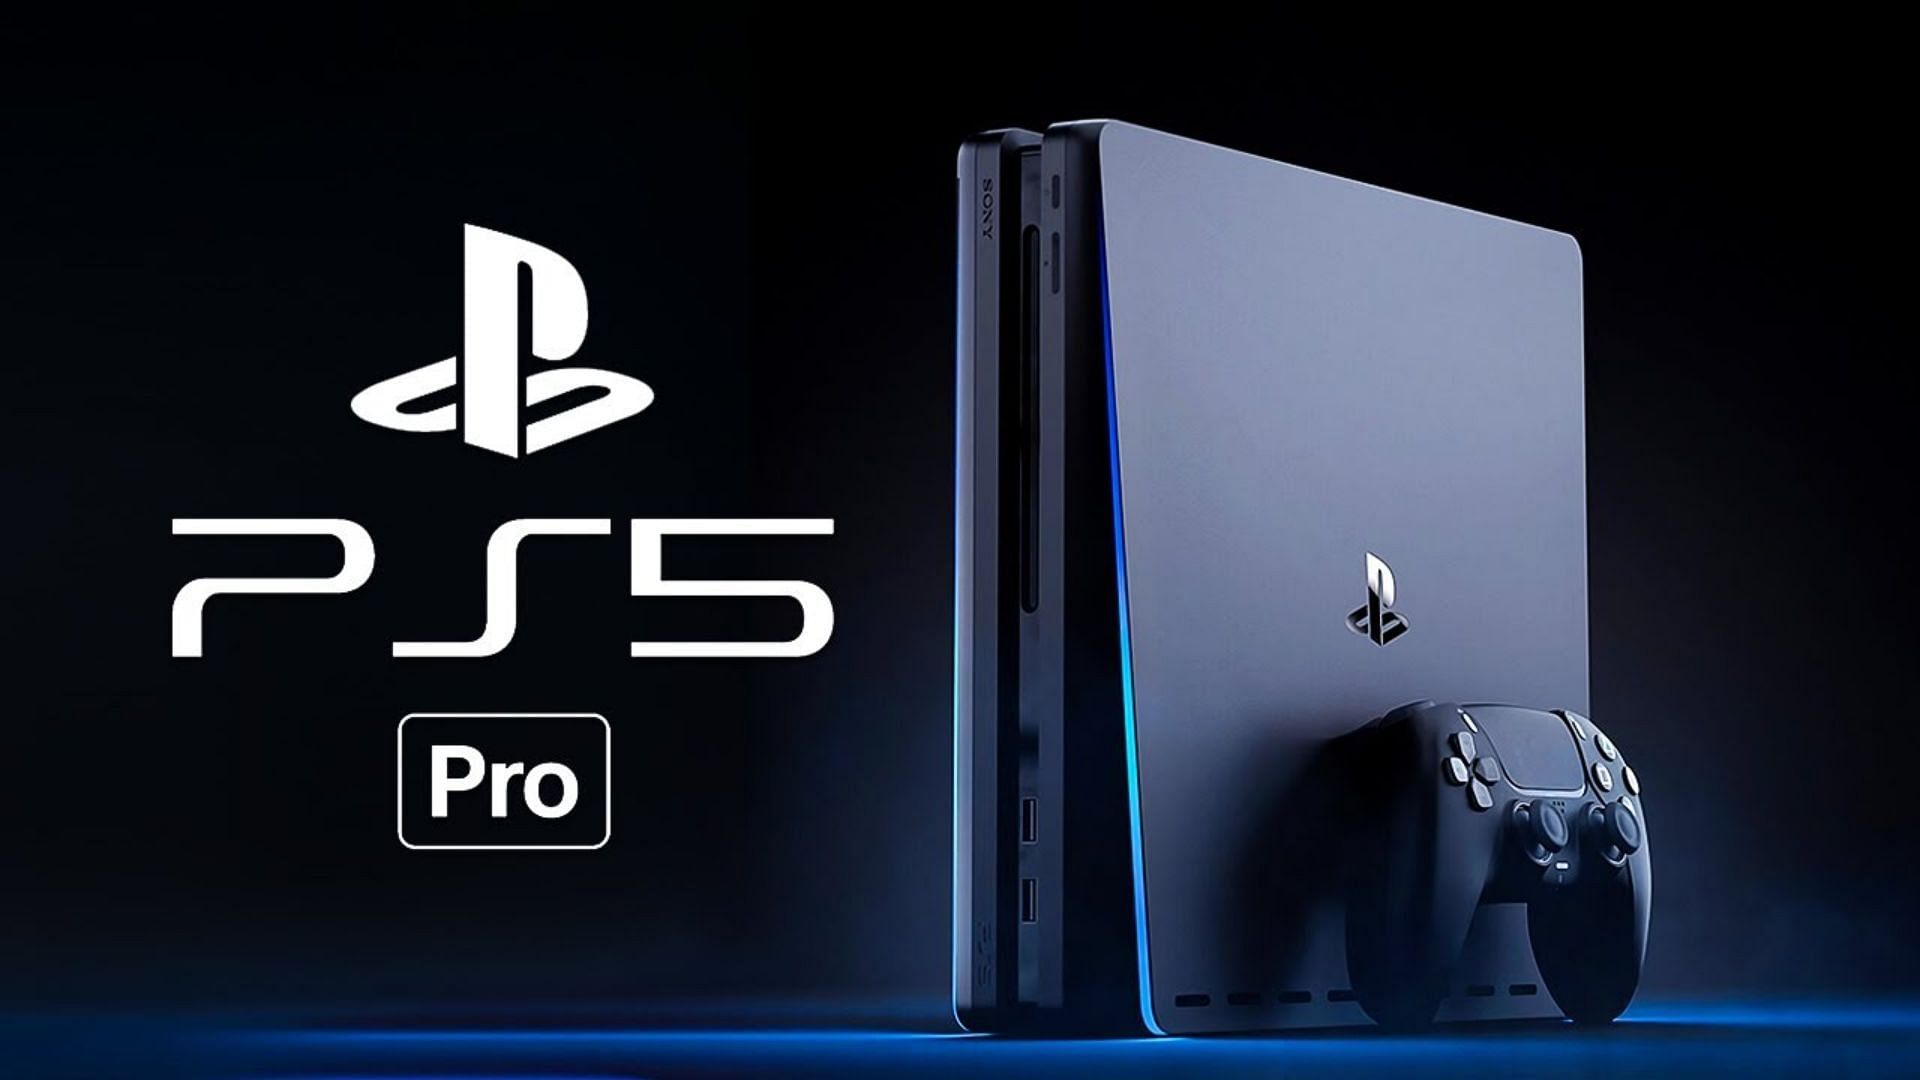 The PS5 Pro is rumored to be a powerful console (Image via Techfluencer/YouTube)